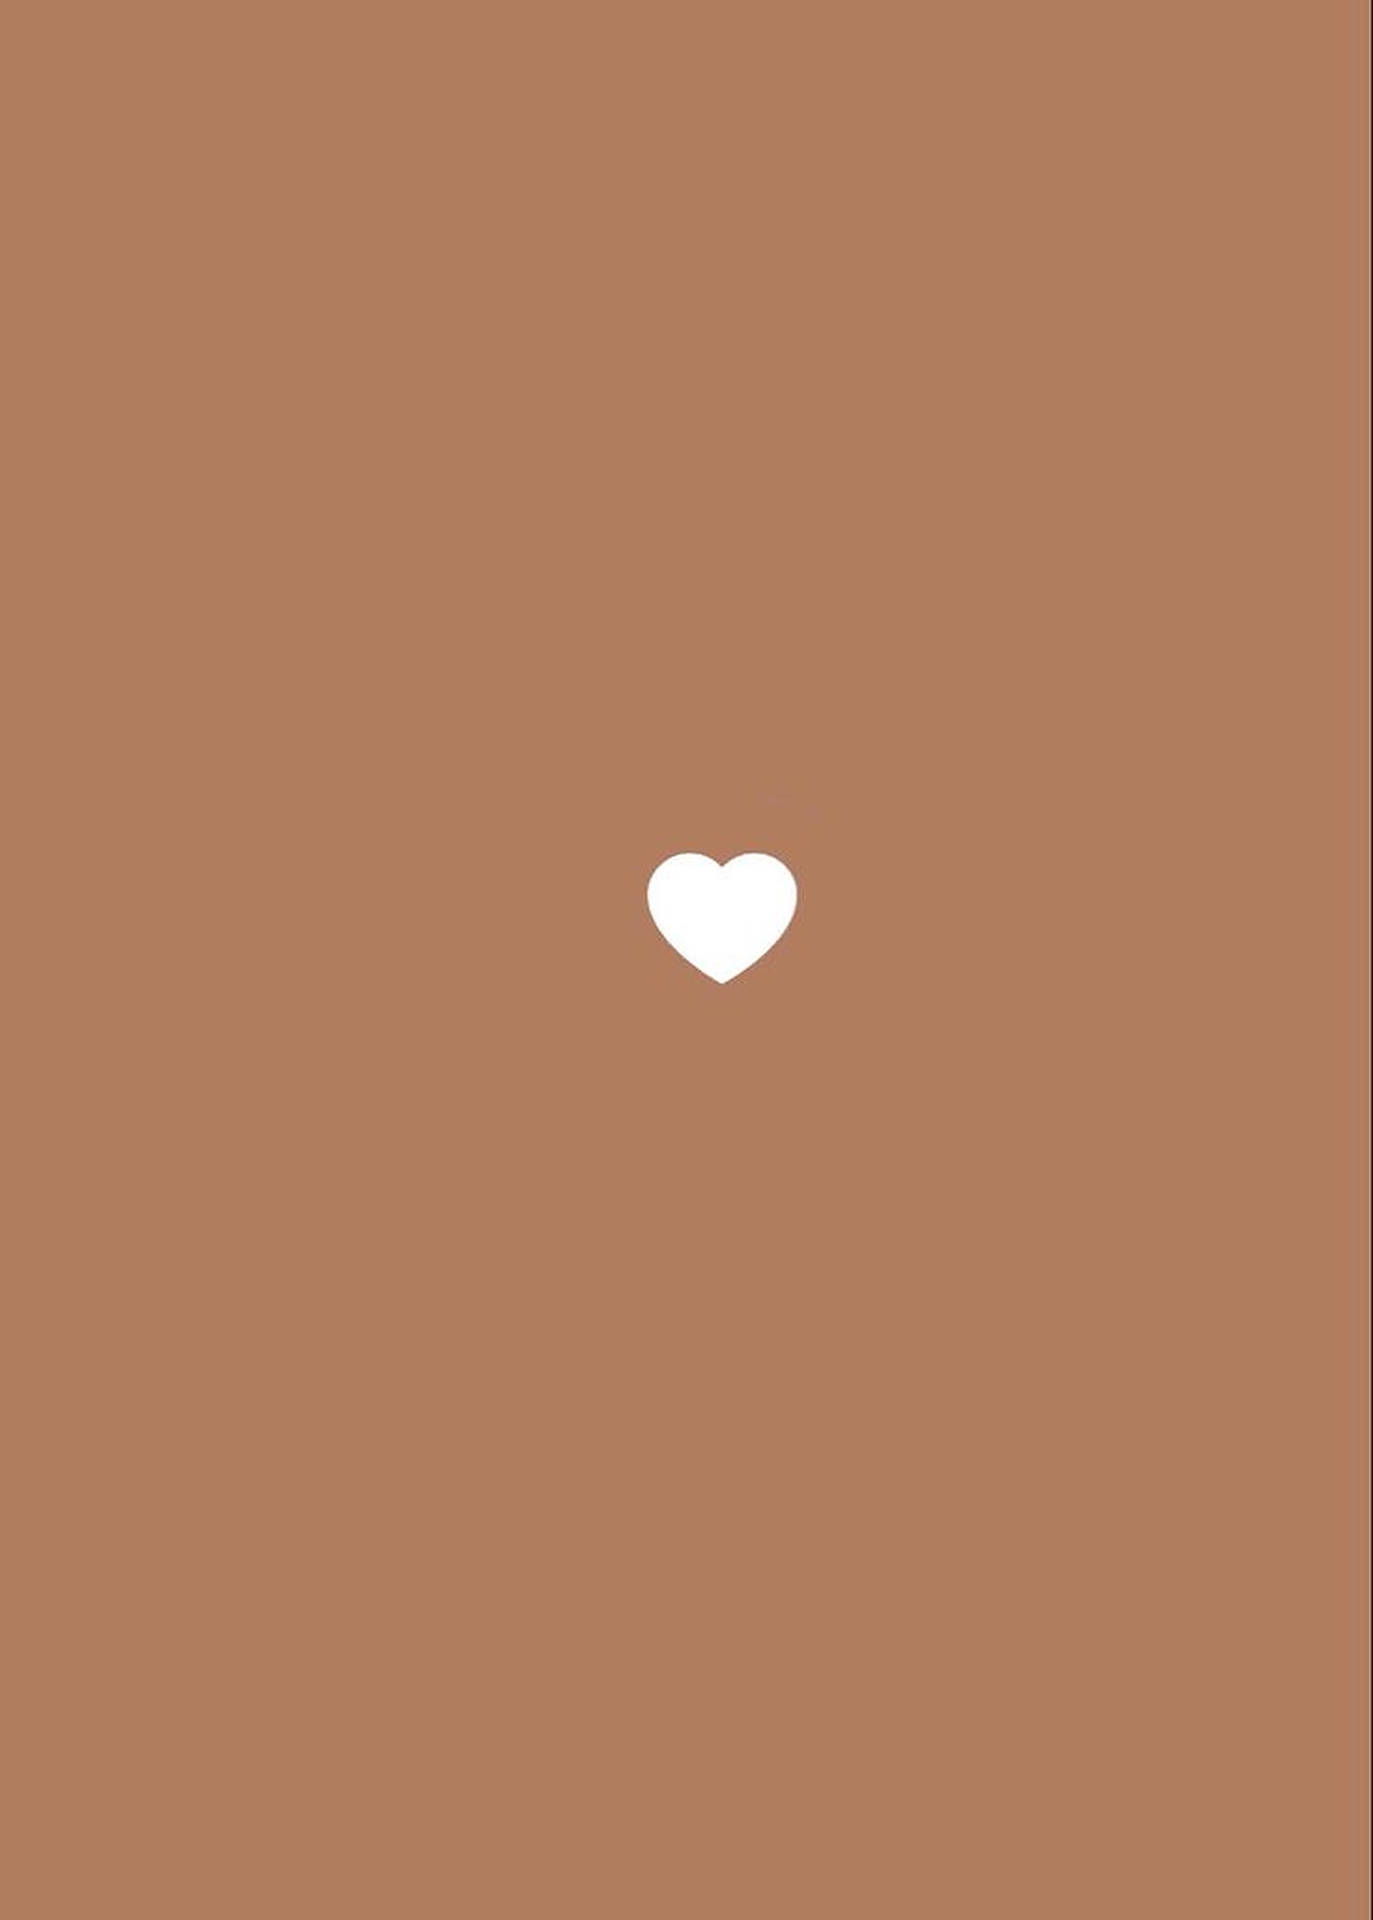 White Heart On Brown